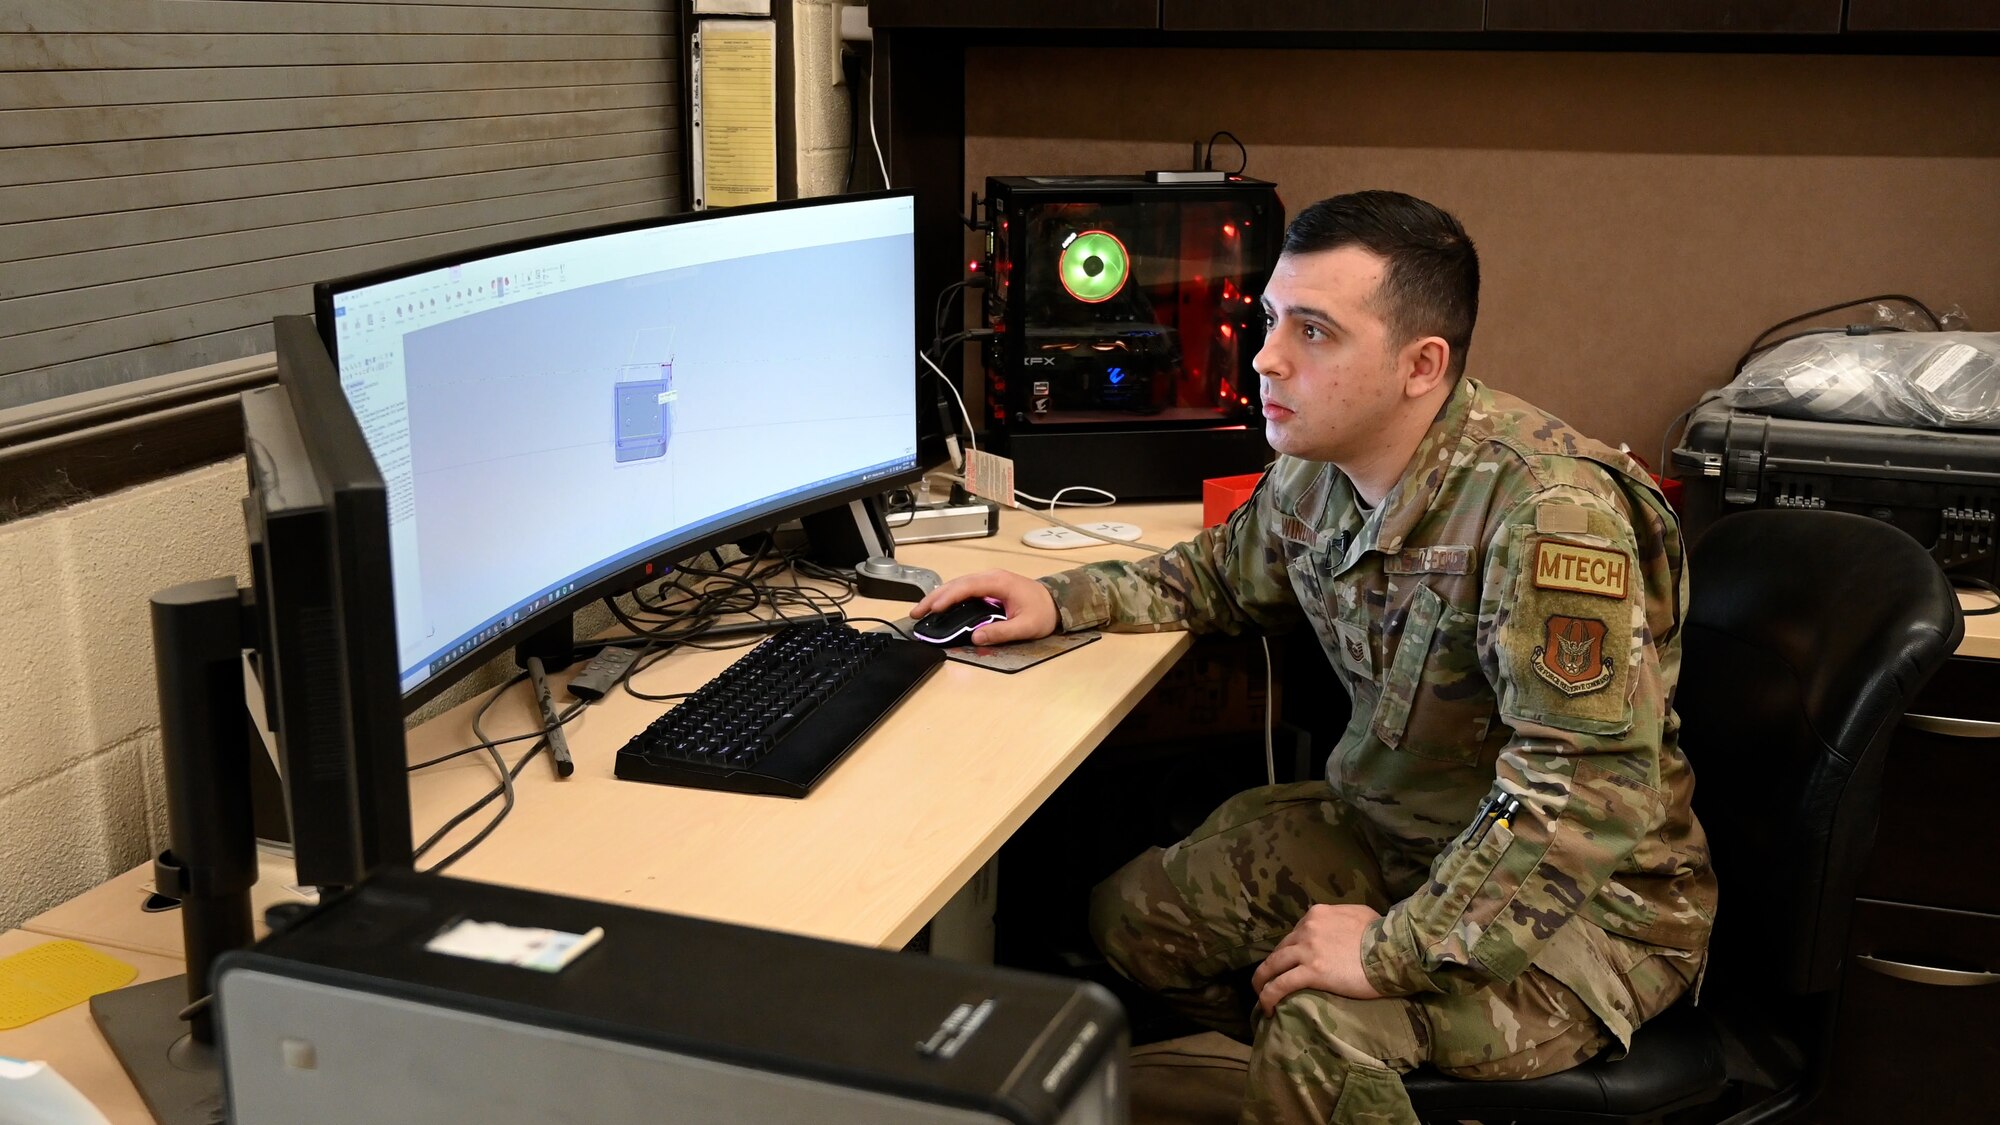 Man in uniform sitting at a desk looking at a computer screen.